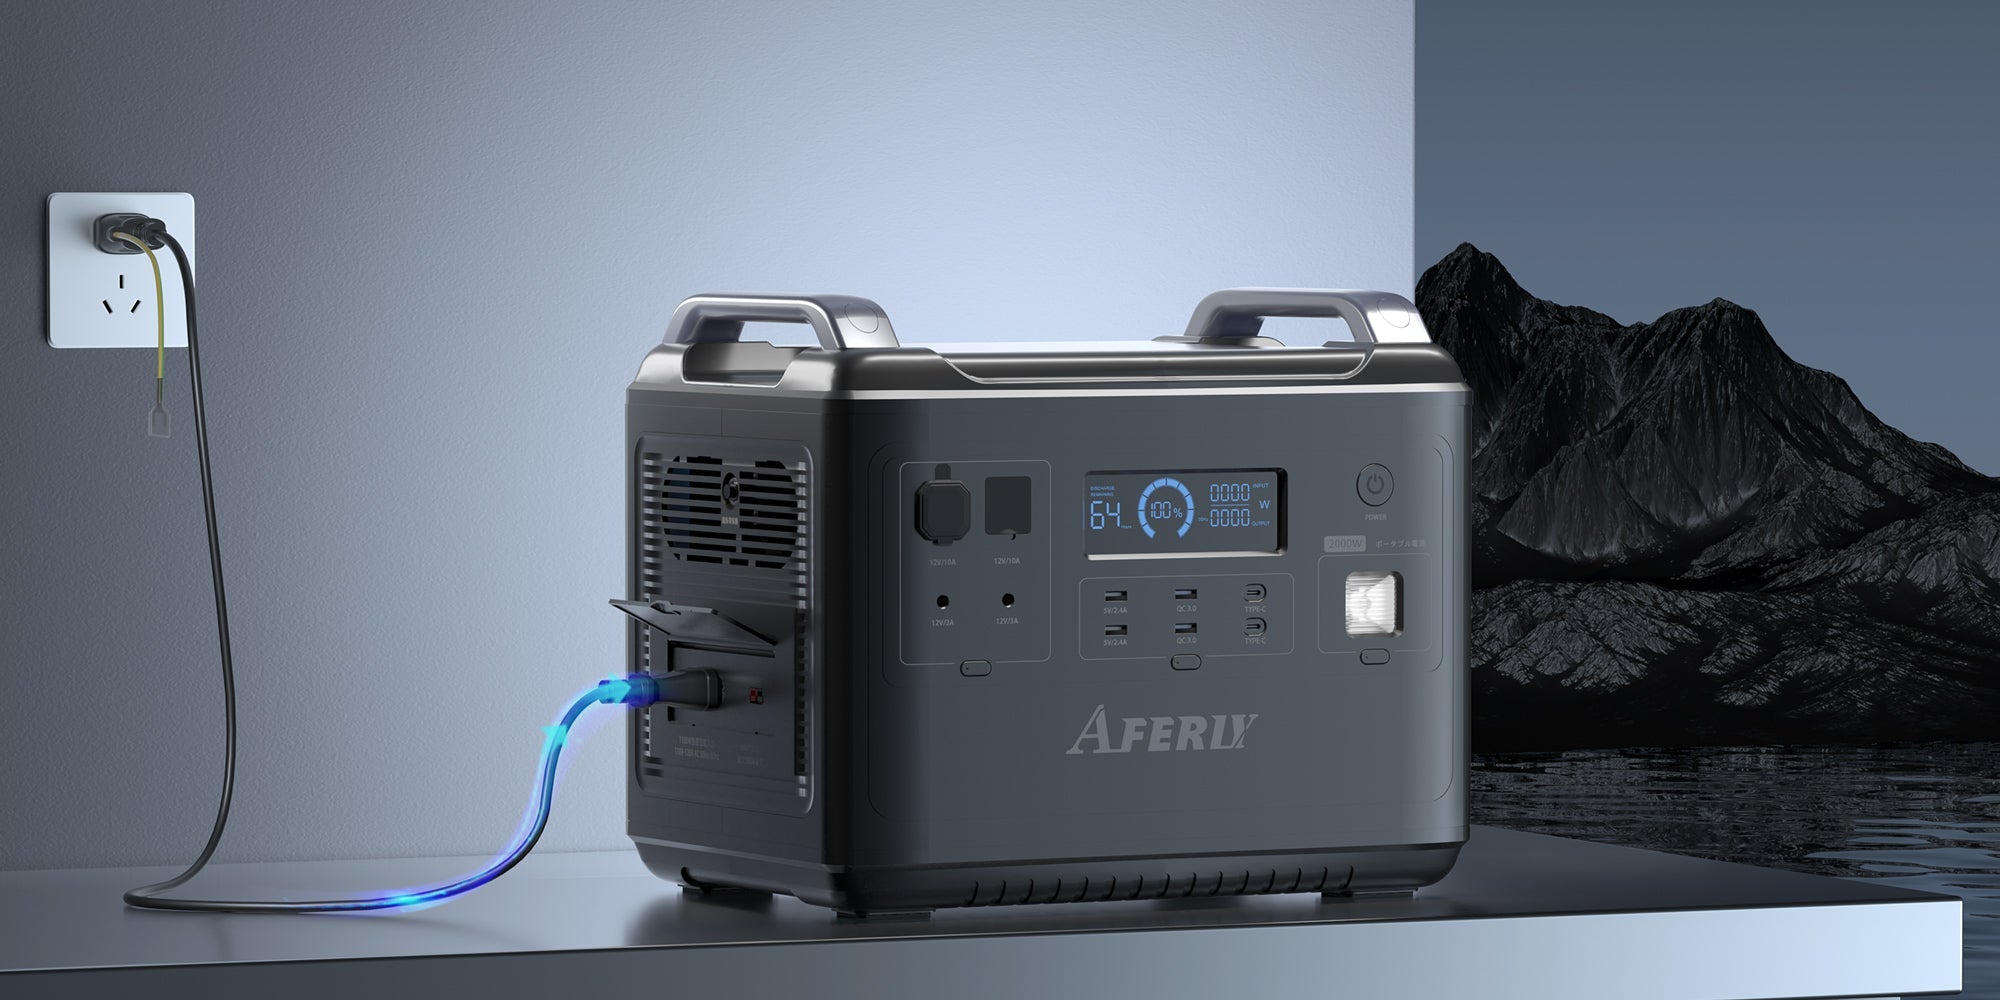 Using the advanced LiFePO4 battery technology, the AFERIY 2001A has more than 3,500 life cycles at 85%.